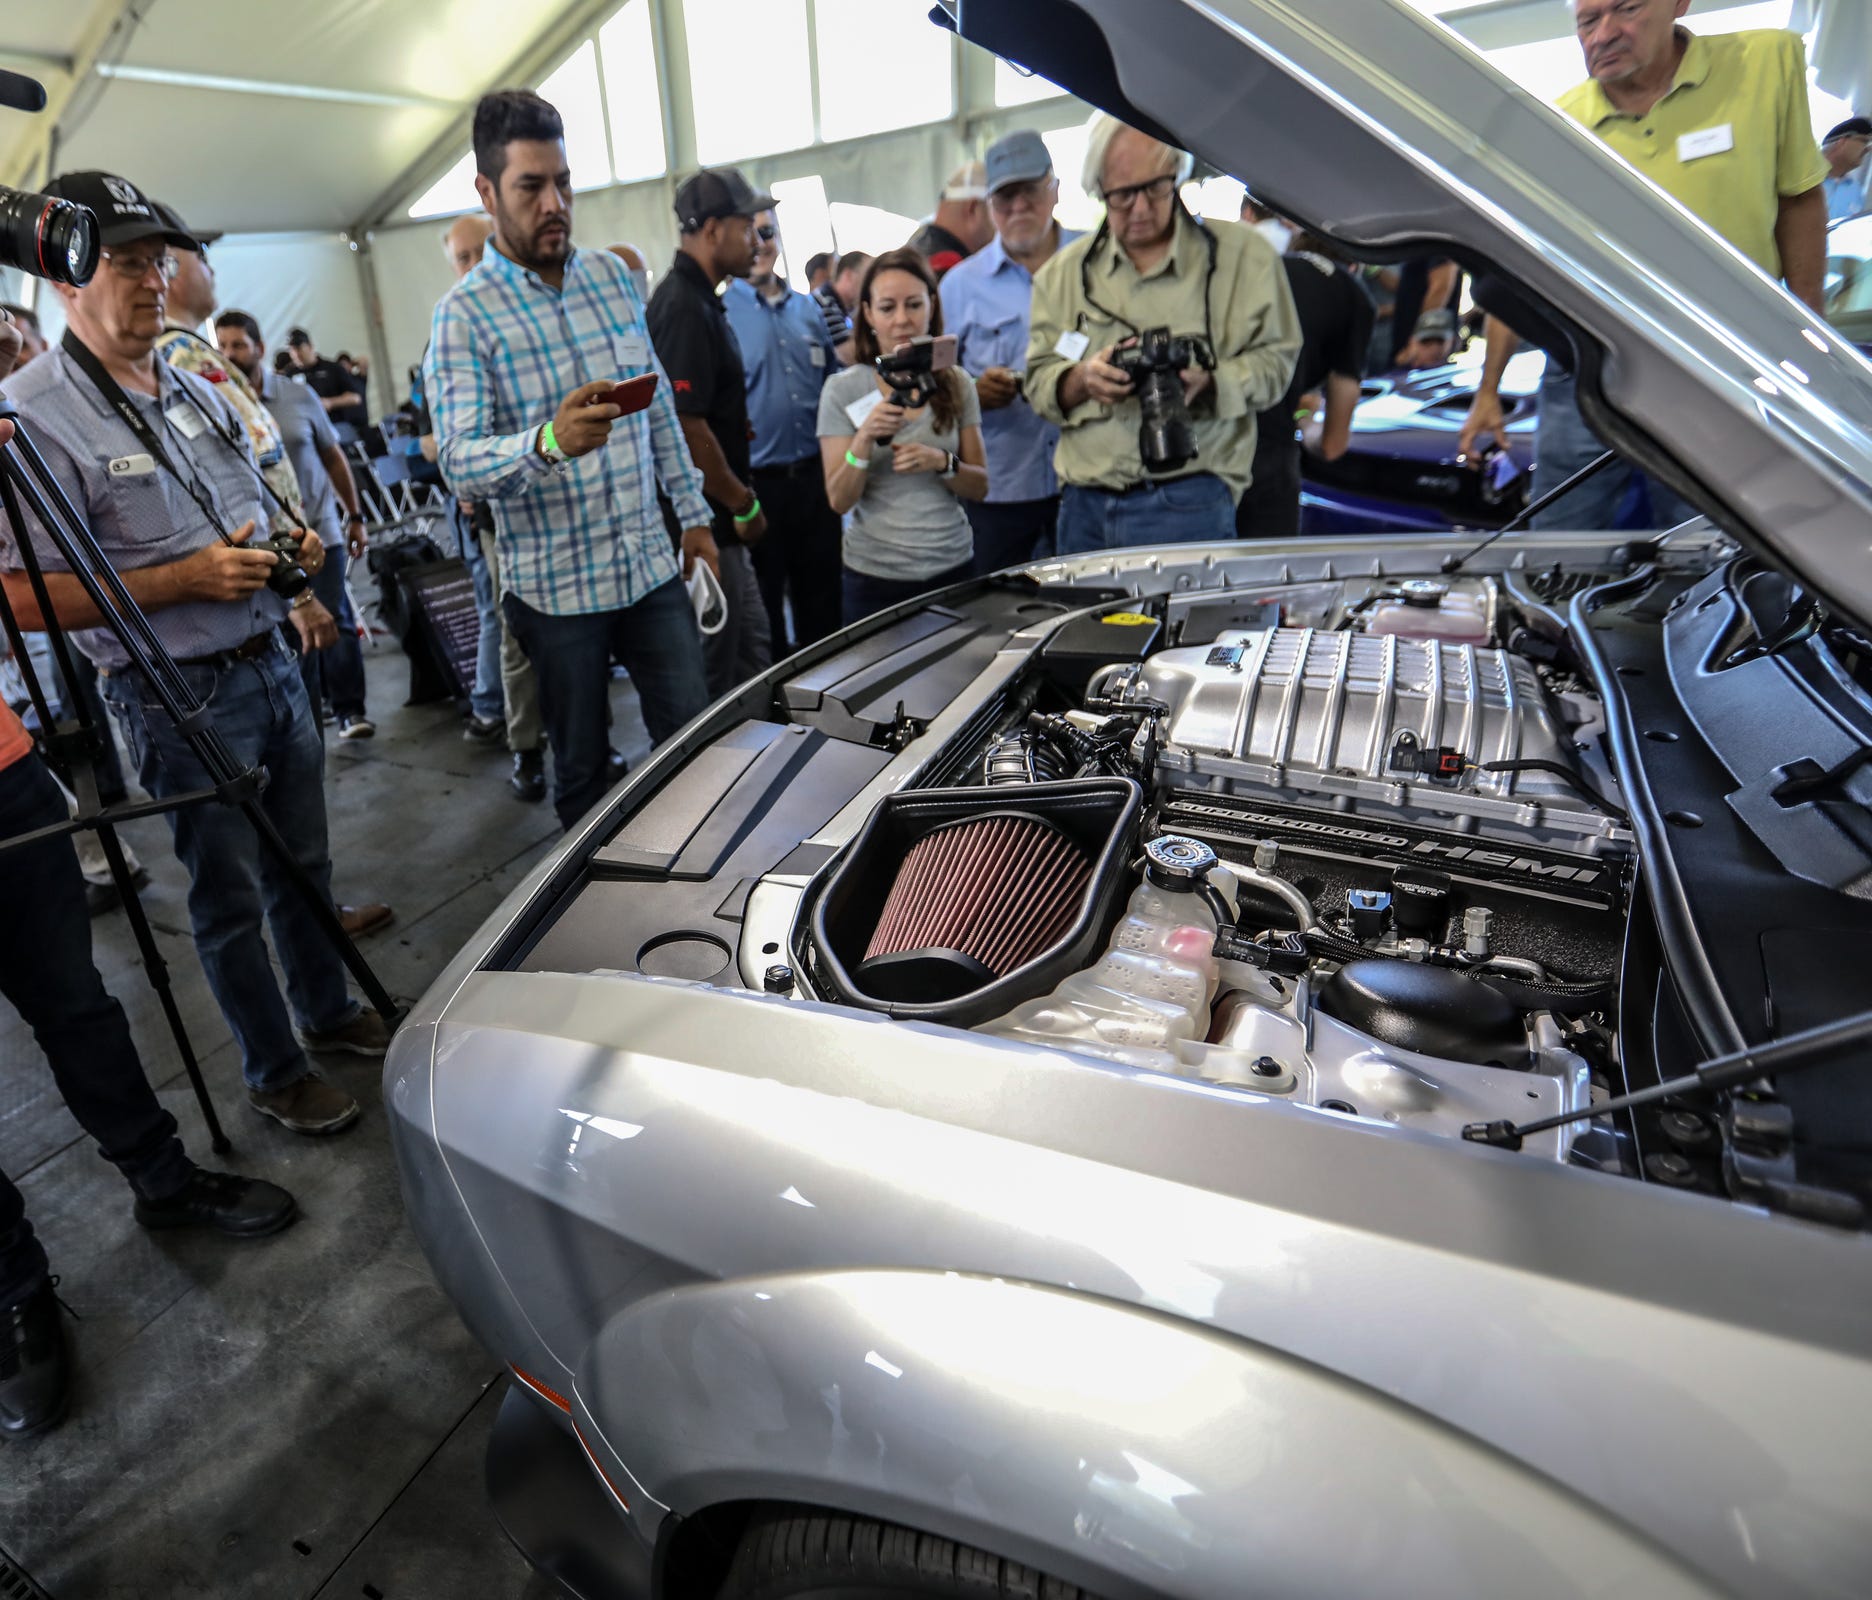 Journalists crowd around to get a look at the engine of the new 2019 Dodge Challenger SRT Hellcat Redeye during What's New event at Chrysler's Chelsea Proving Grounds in Chelsea, Mich. on Thursday, June 28, 2018.